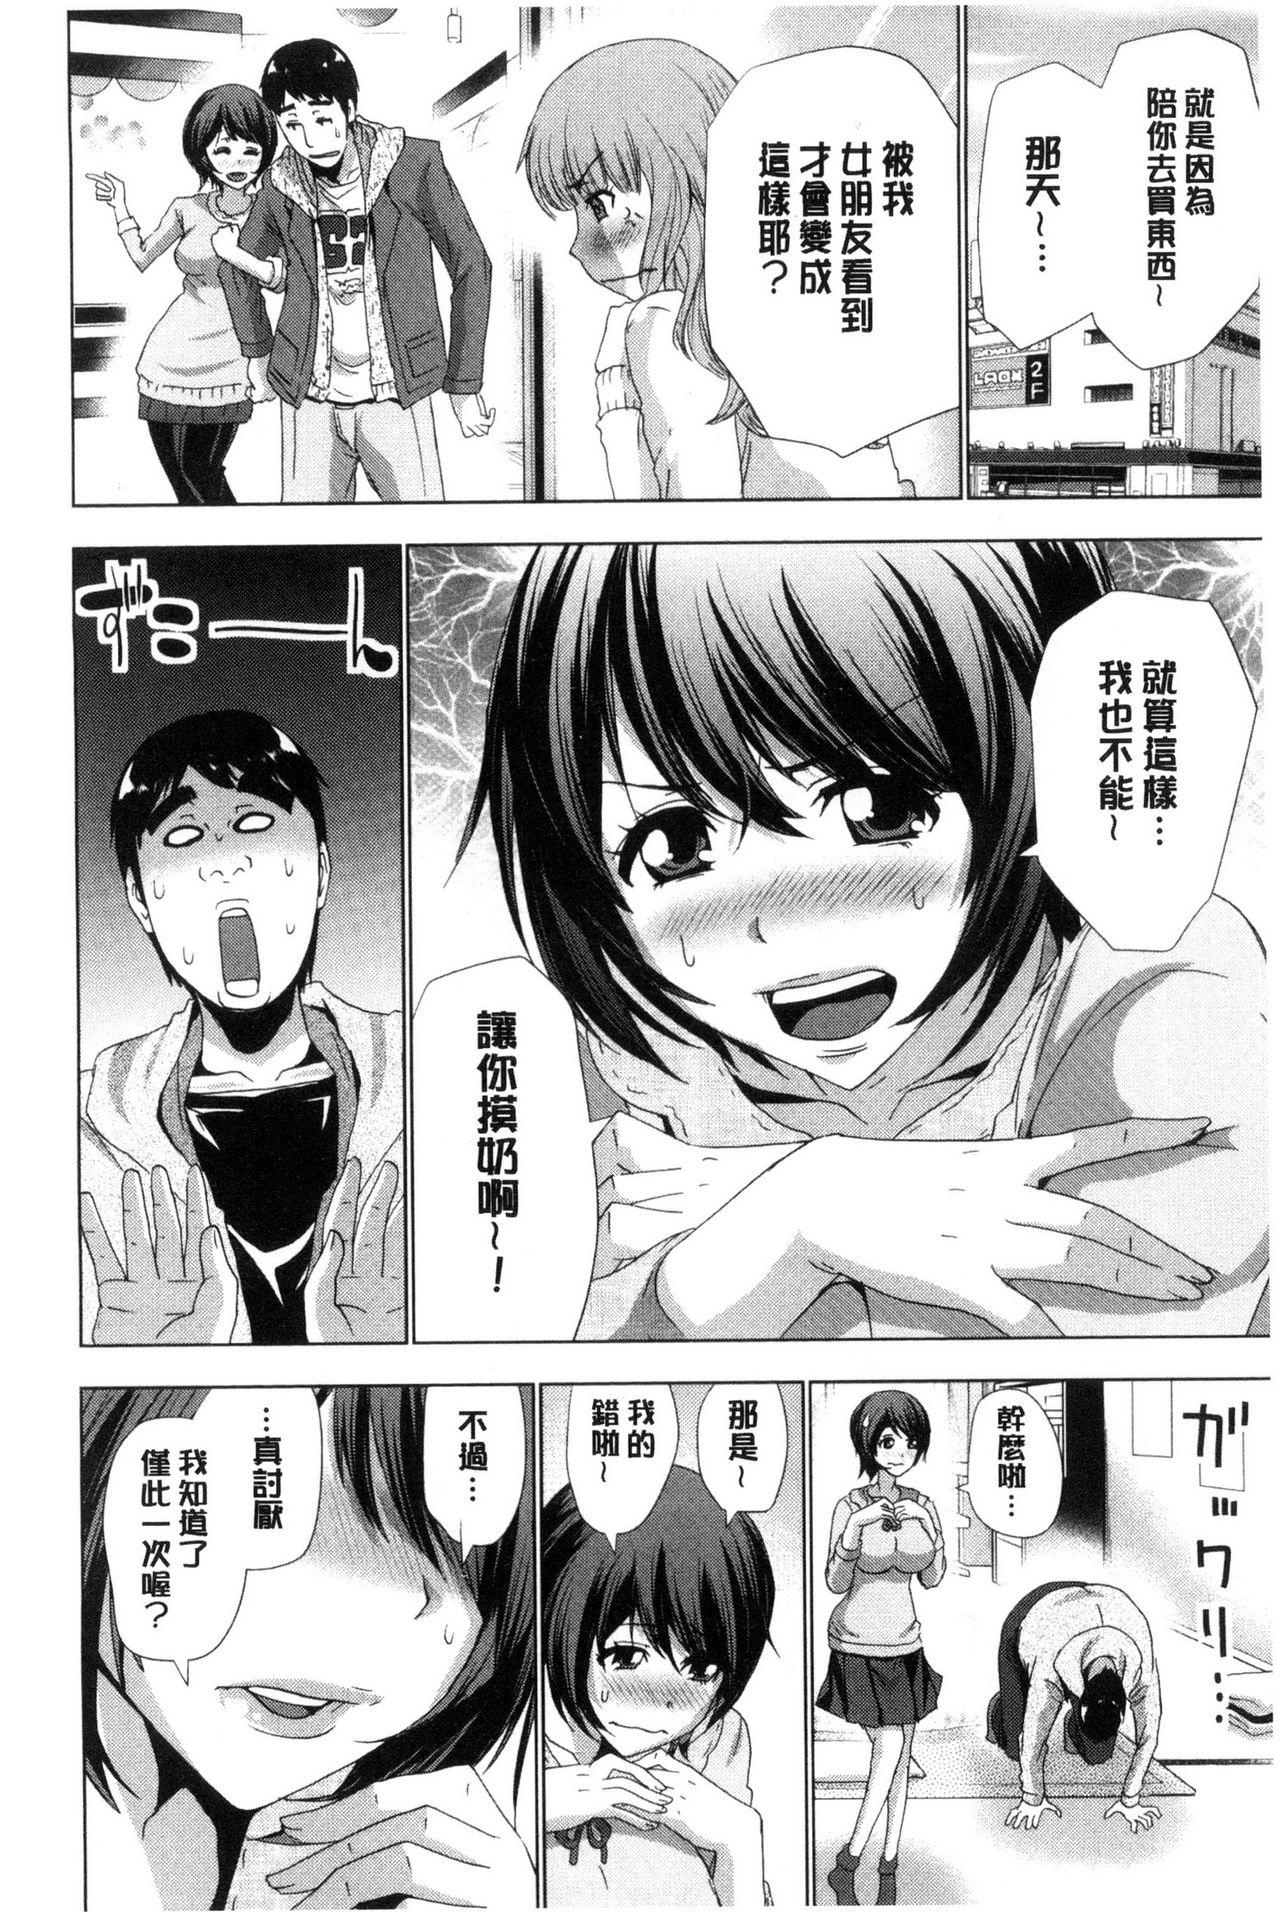 Tanned Dogeza Oppai! | 跪下來仰望美乳! Animation - Page 11